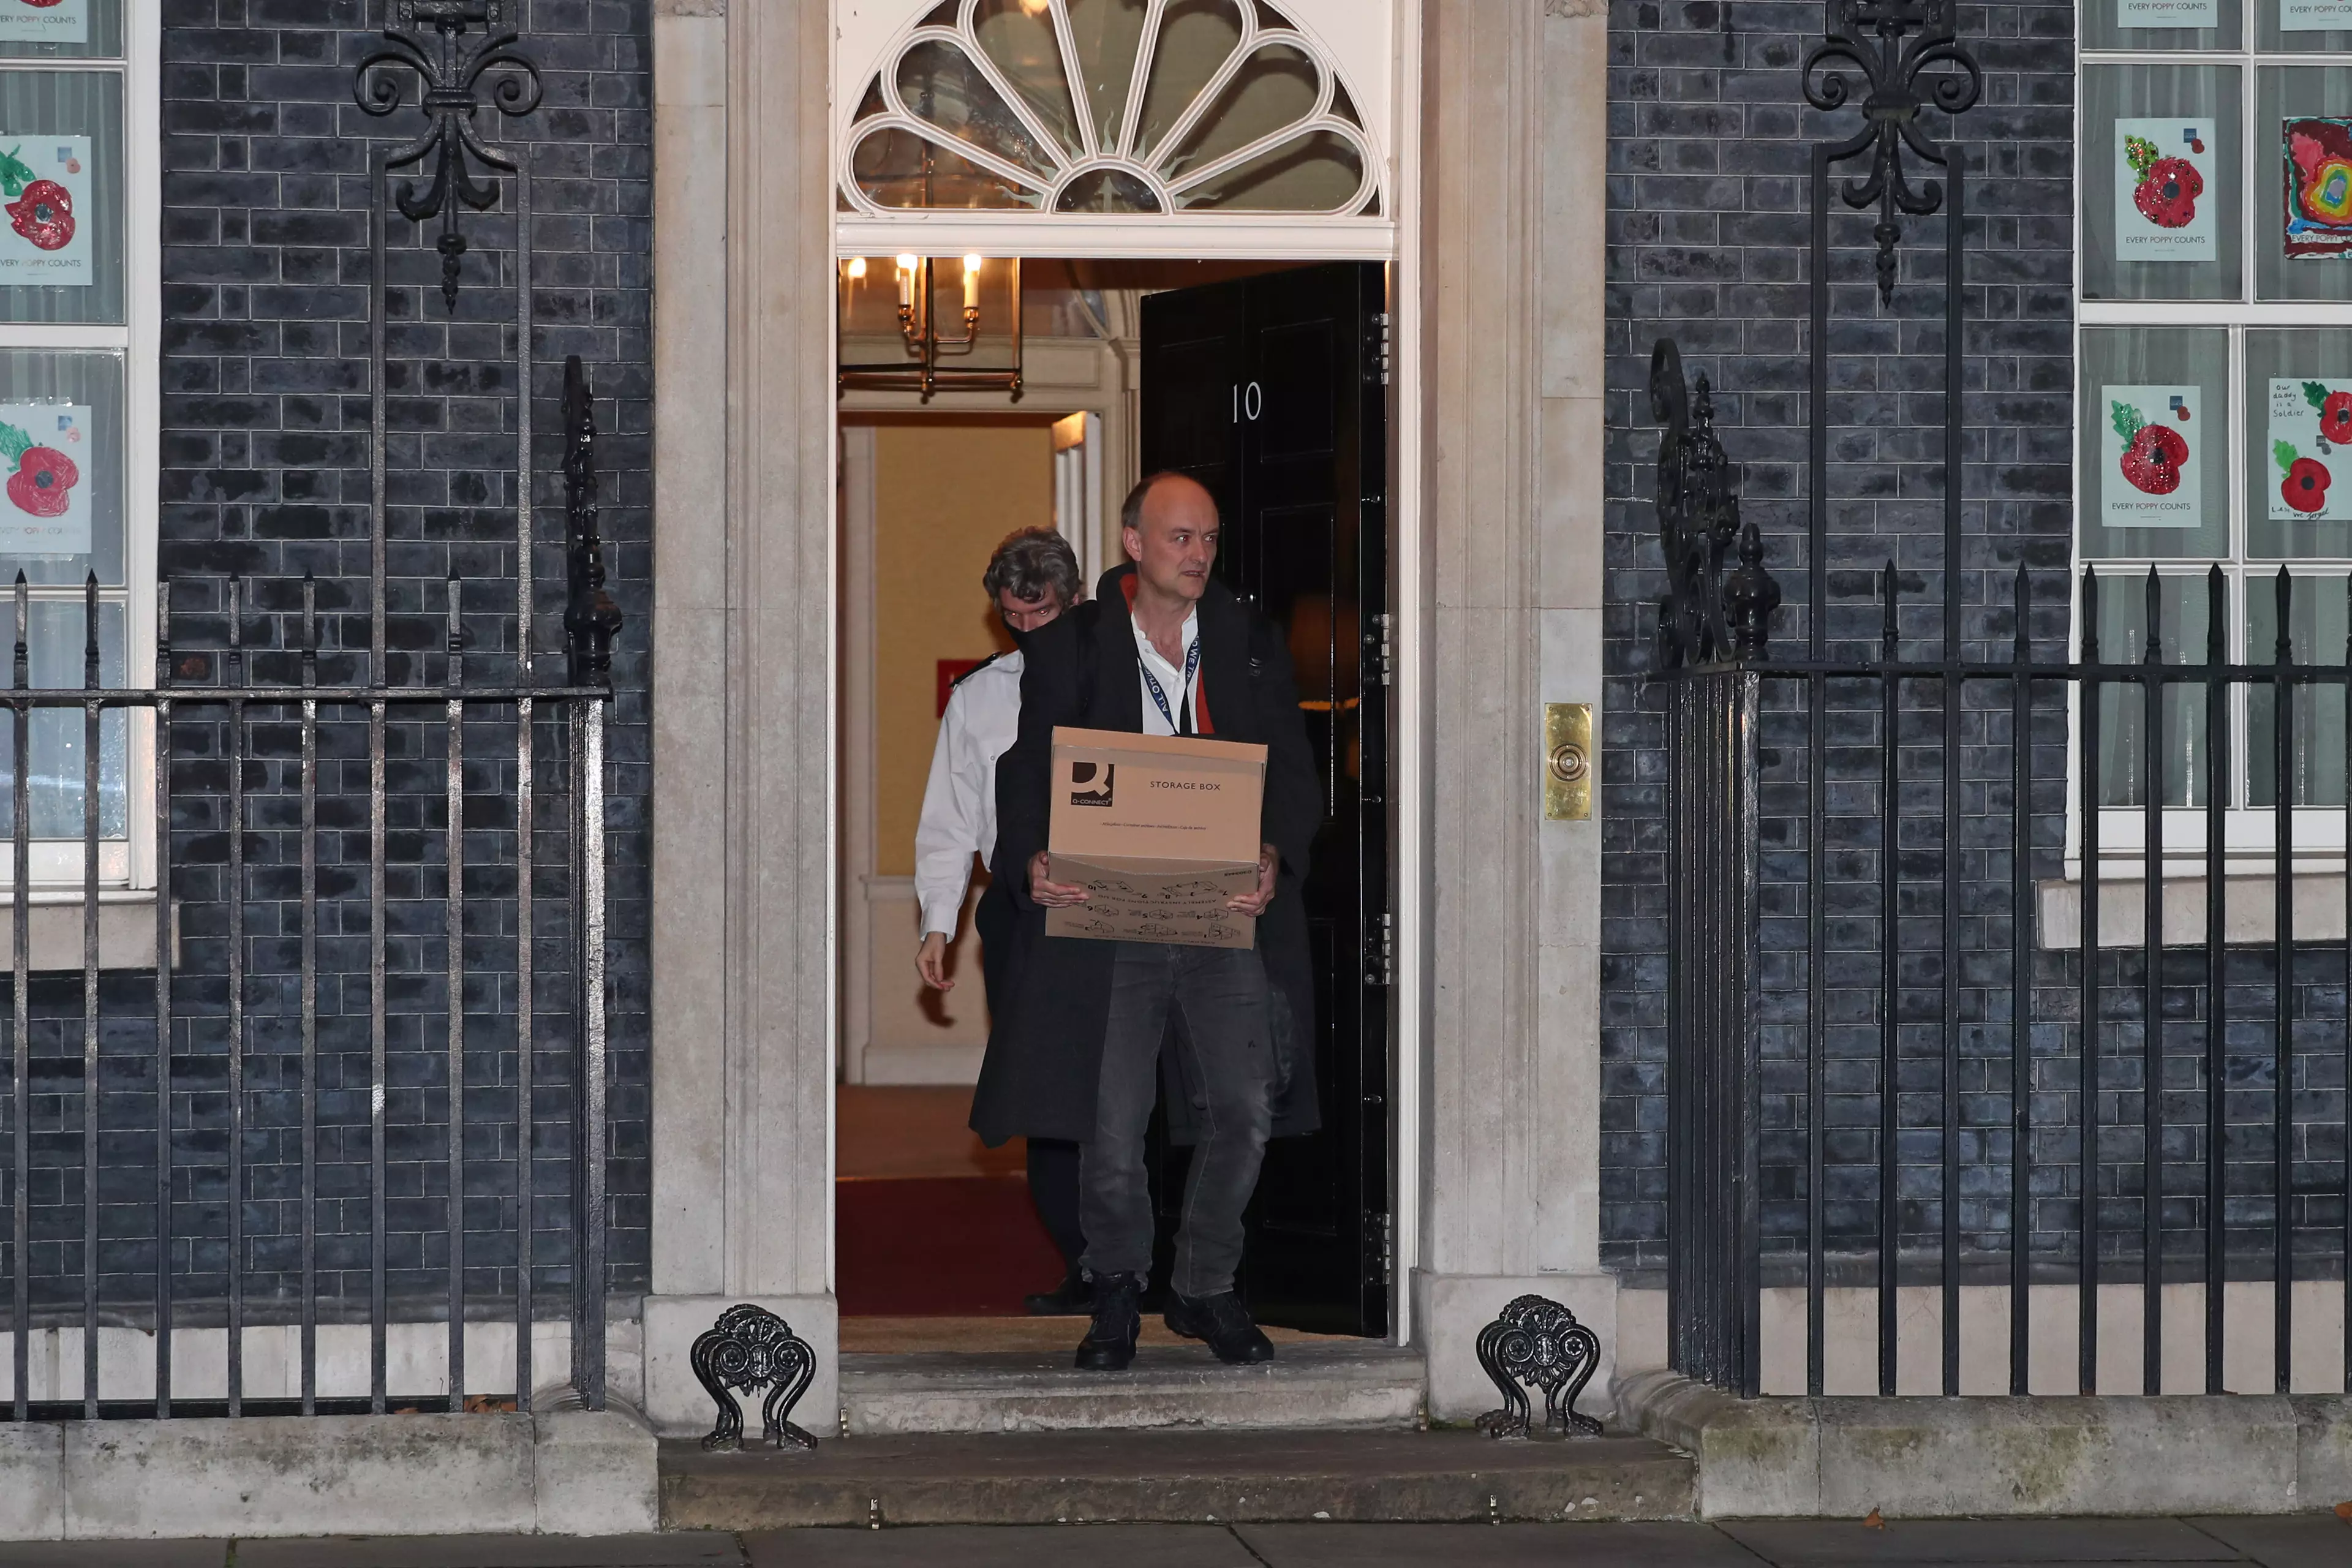 Dominic Cummings has reportedly left his role at Number 10 with immediate effect.